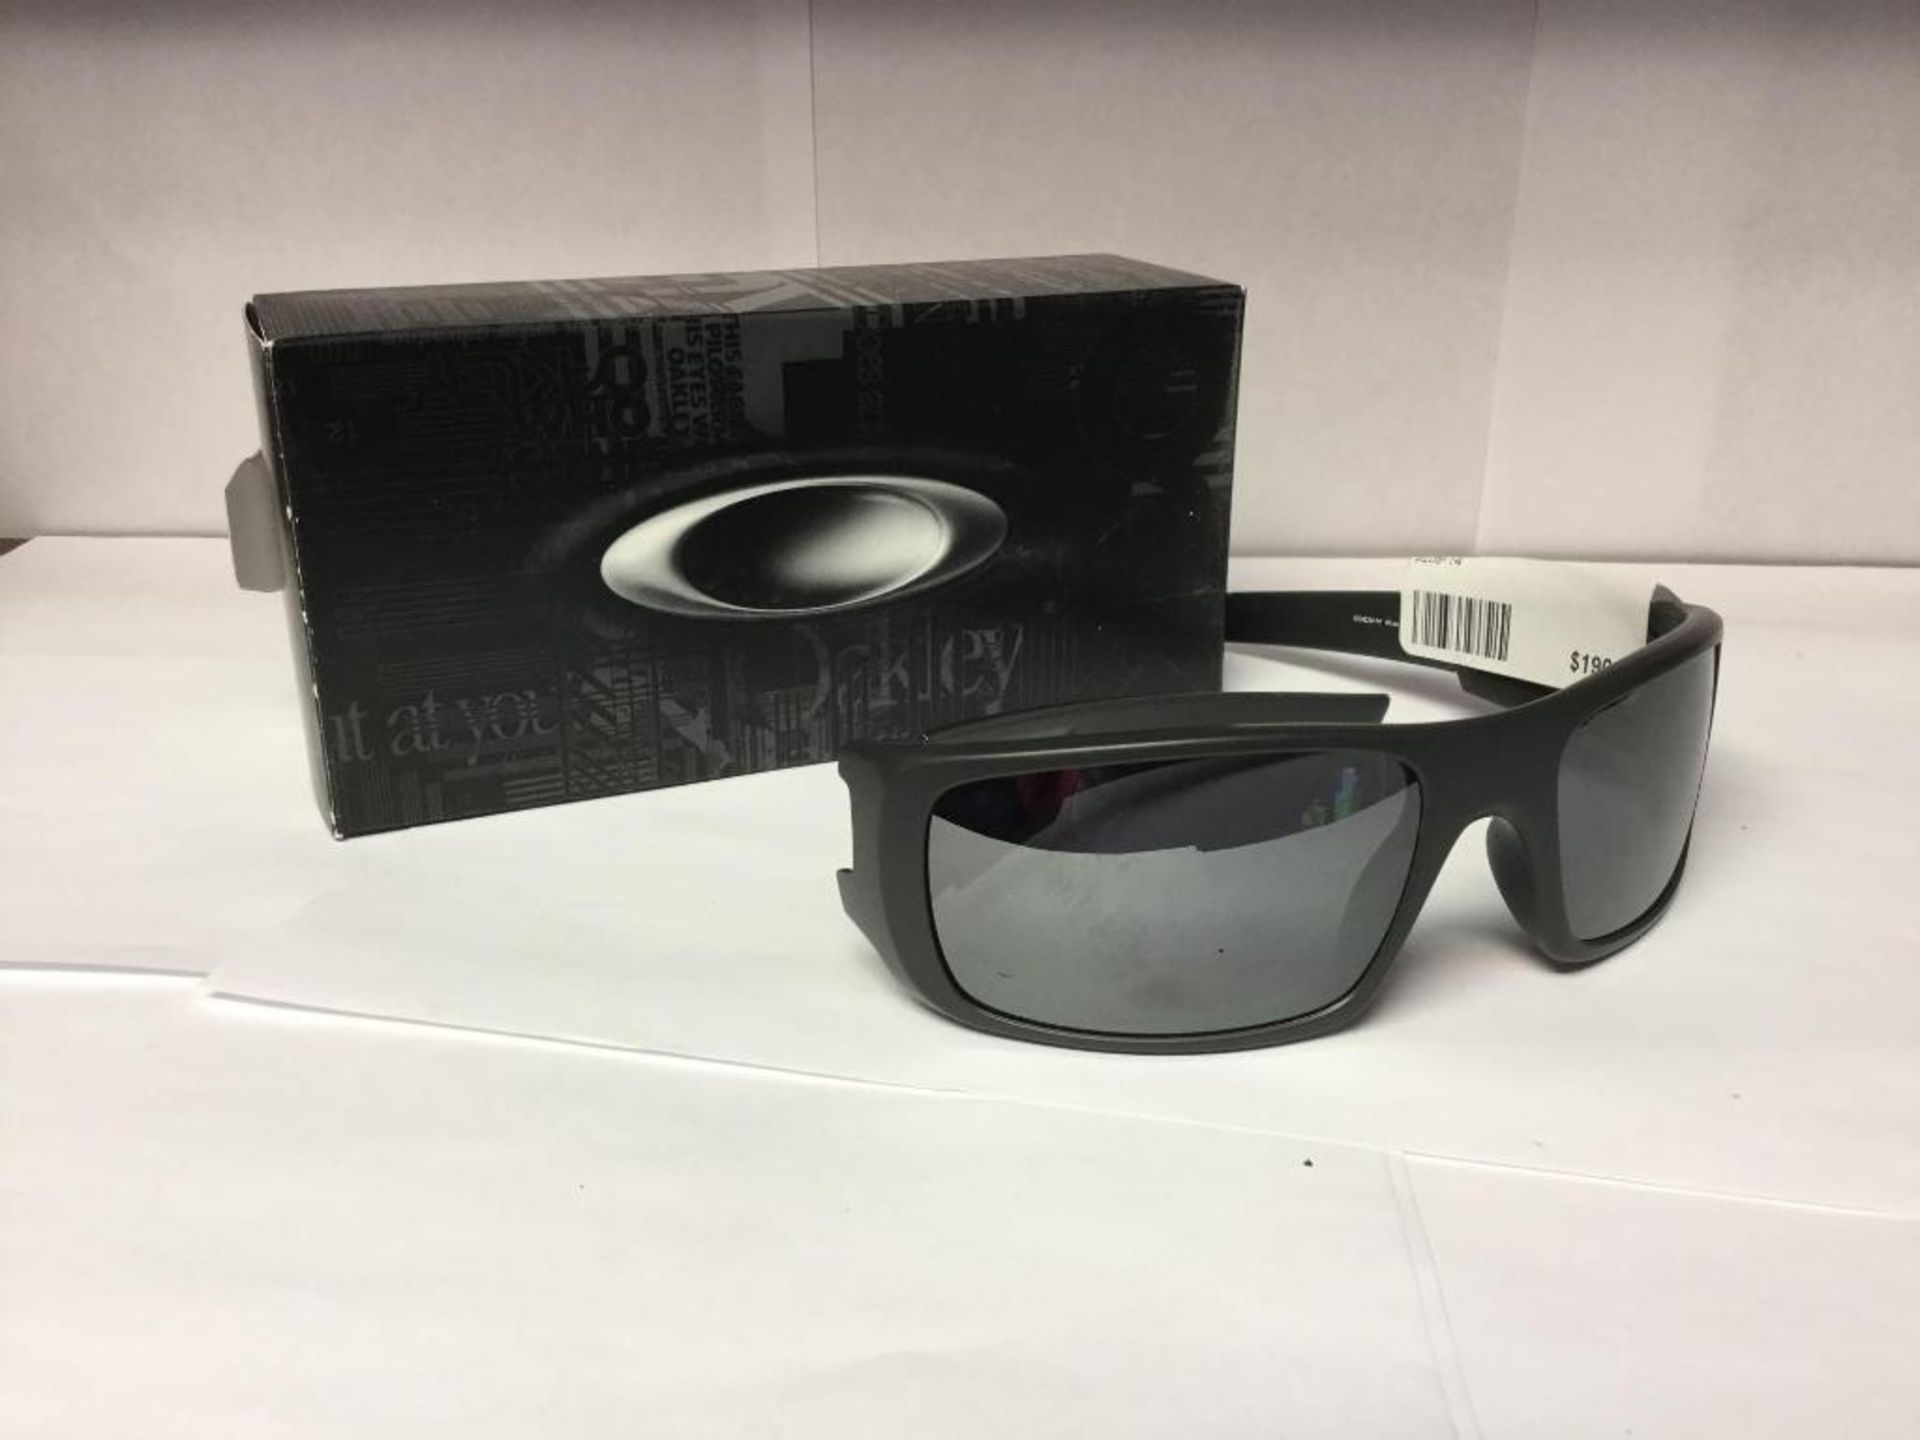 Oakley Sunglasses with Bag and Box Value $190